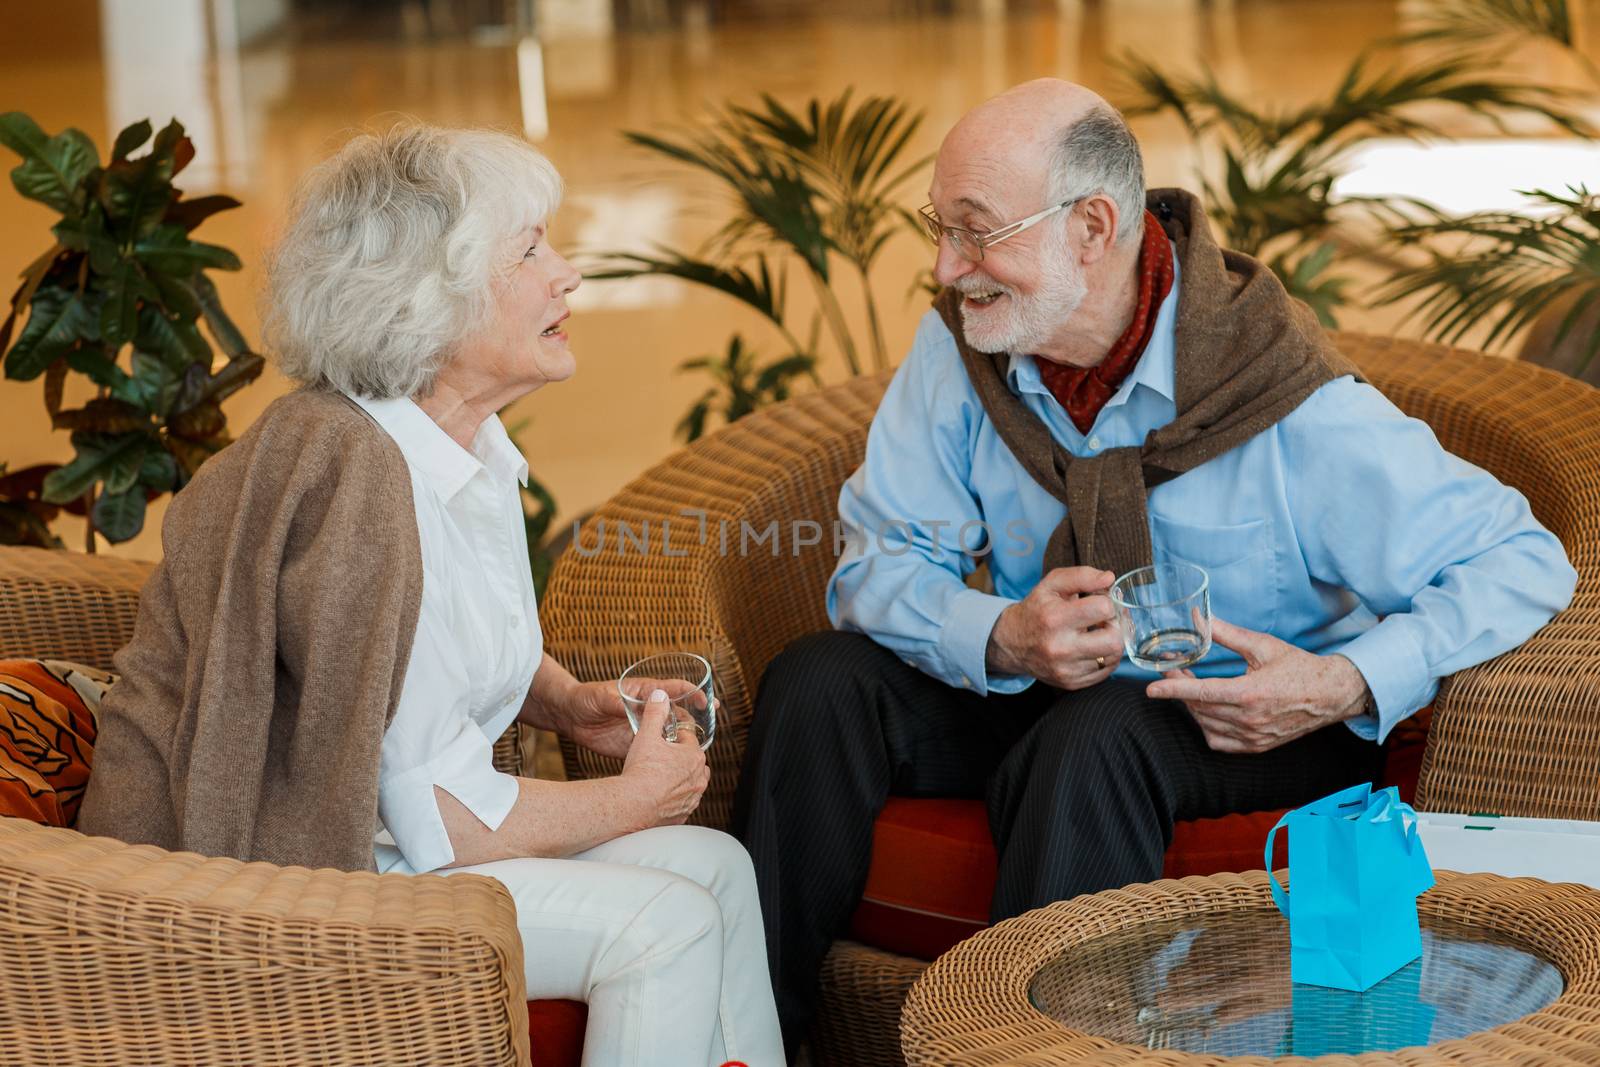 Elderly couple in cafe sitting, smiling and talking to each other